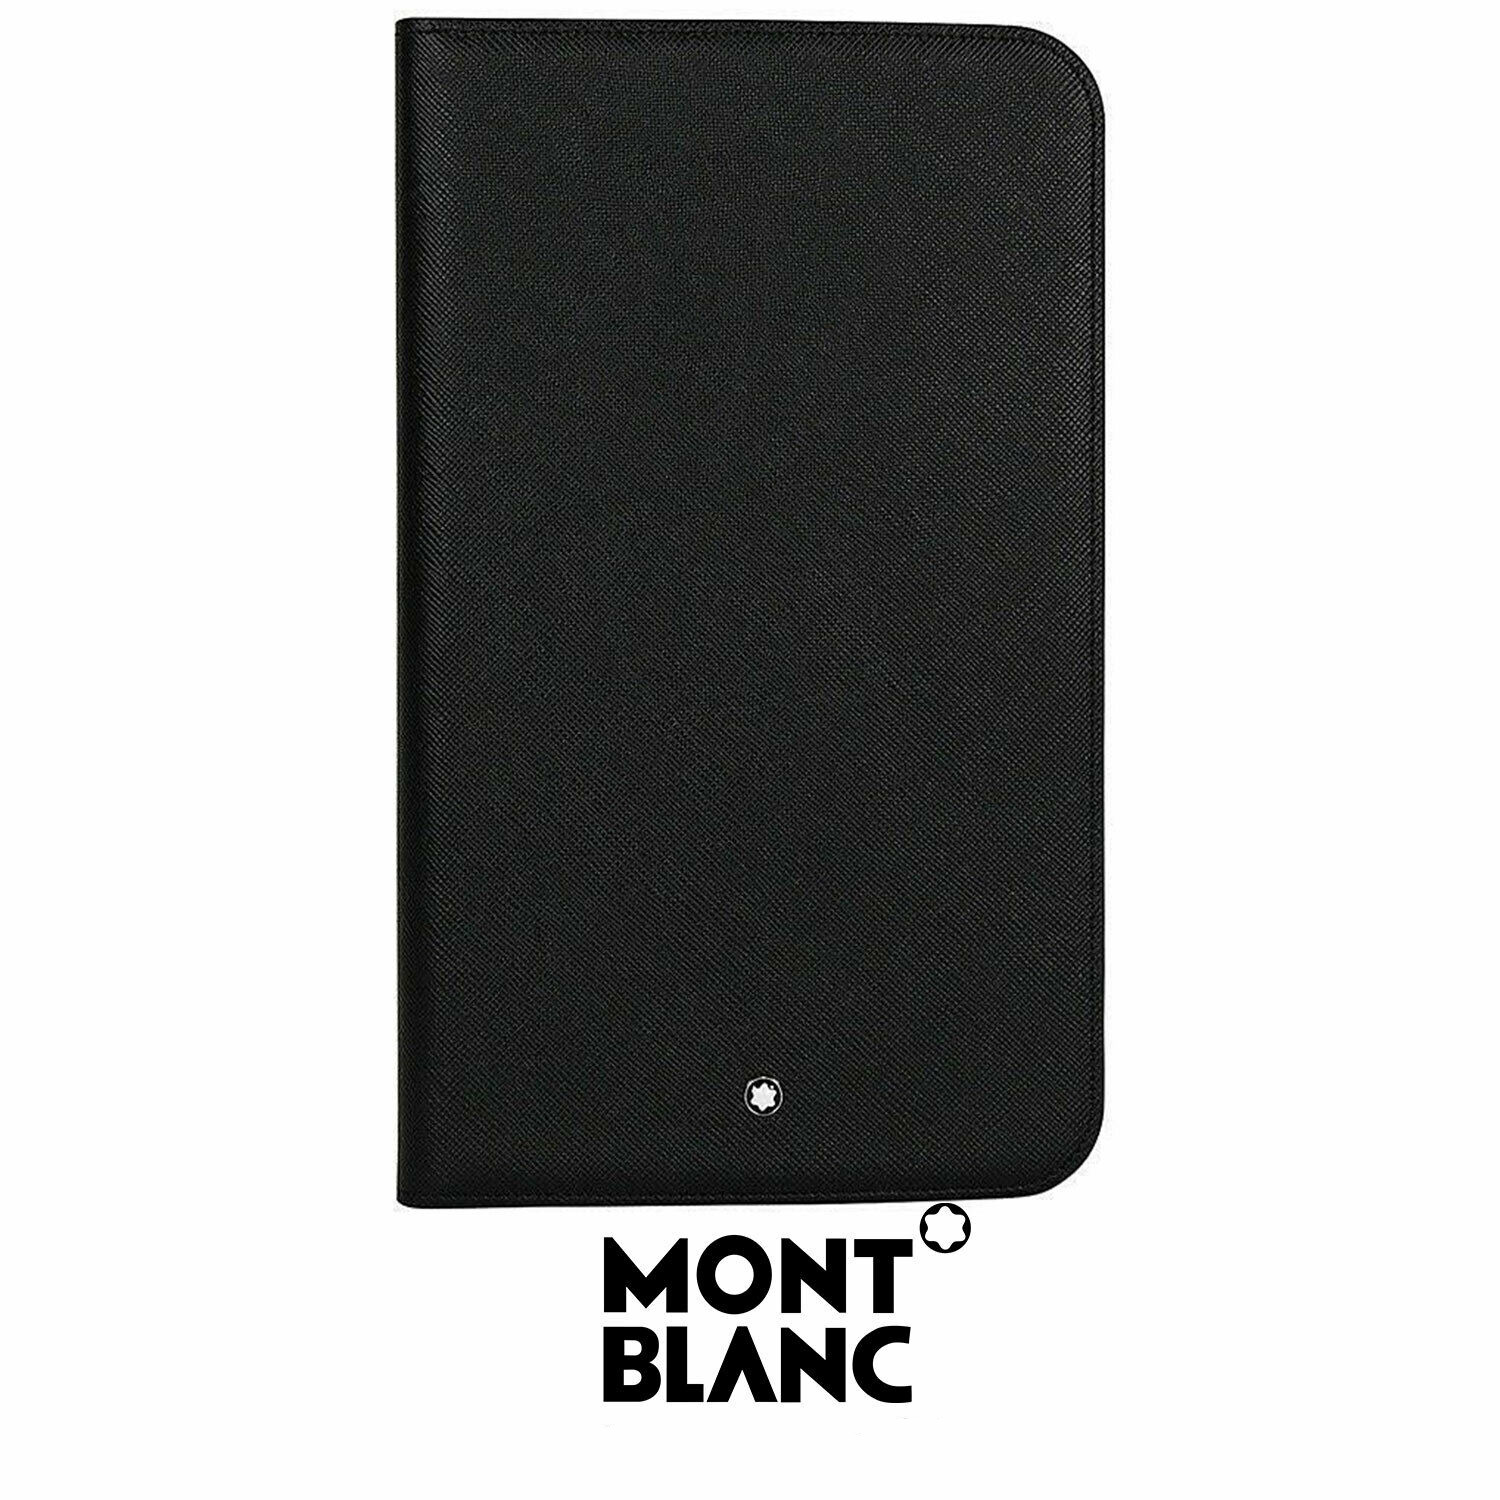 New Montblanc Meisterstuck Selection Black Leather Samsung Galaxy Tab 3 Case 